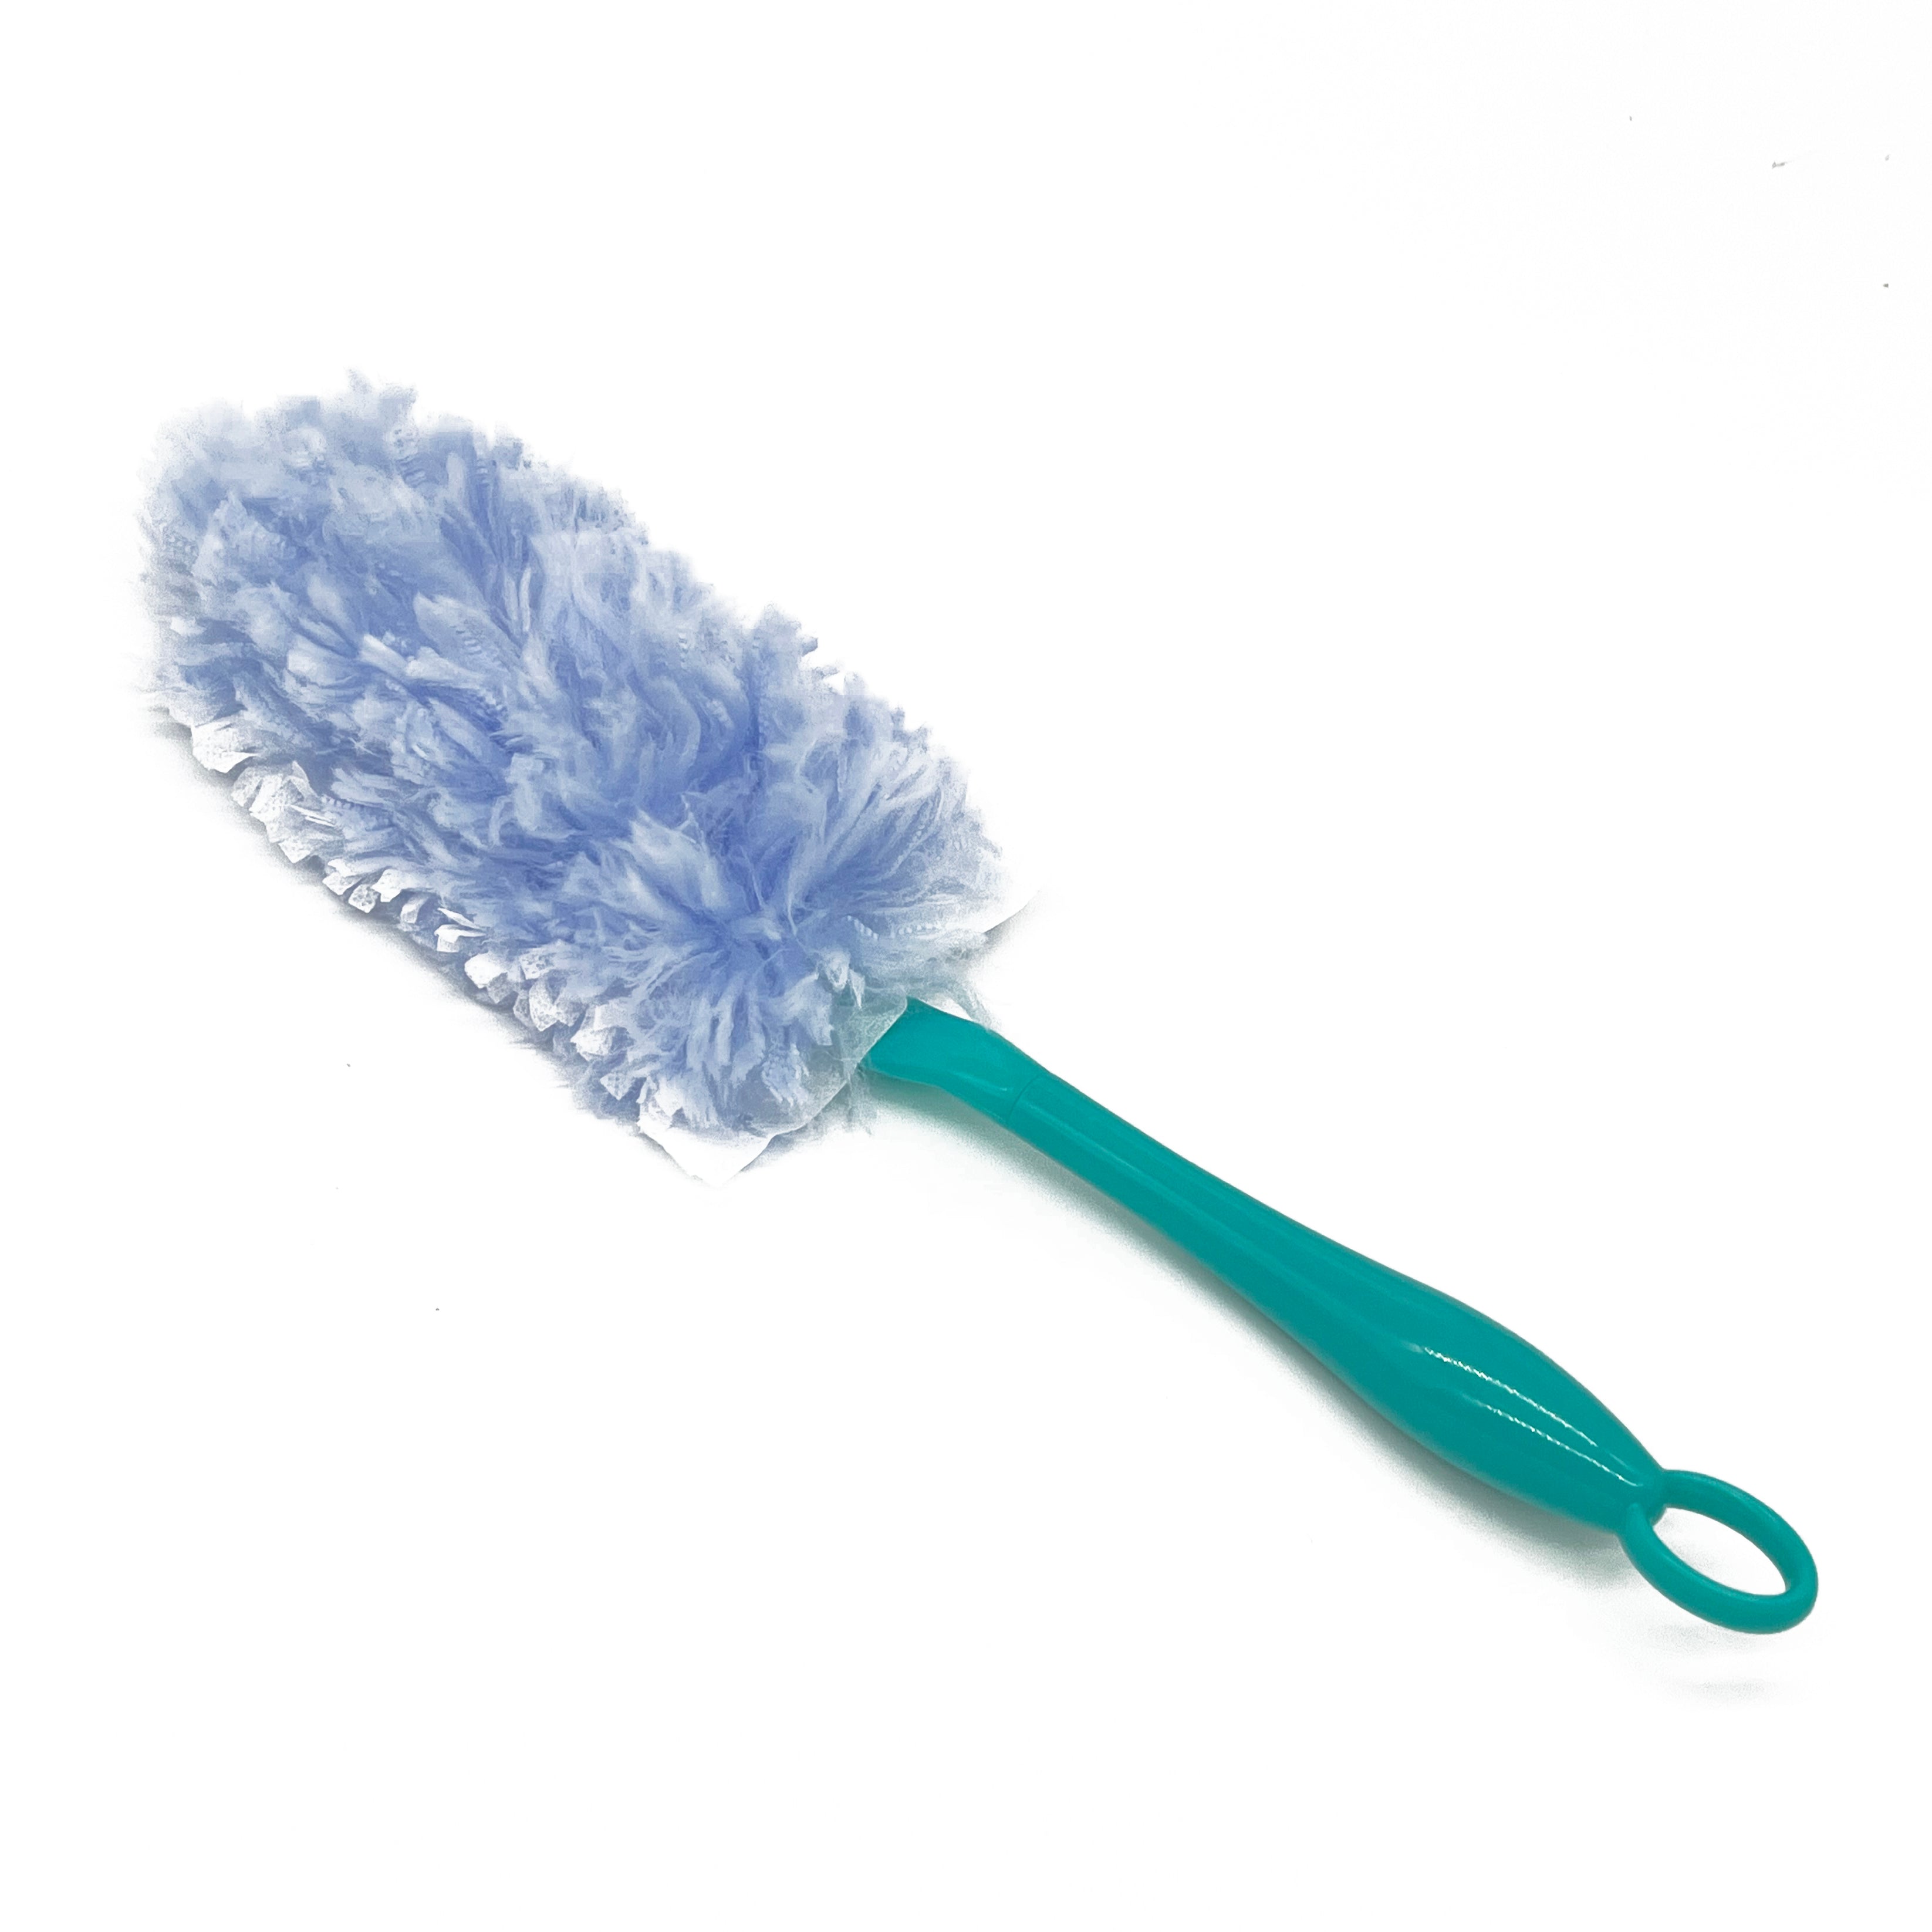 Hand with Soft Colorful Duster, Synthetic Feather Broom, Fluffy Cleaner  Image stock - Image du douceur, doux: 149940521